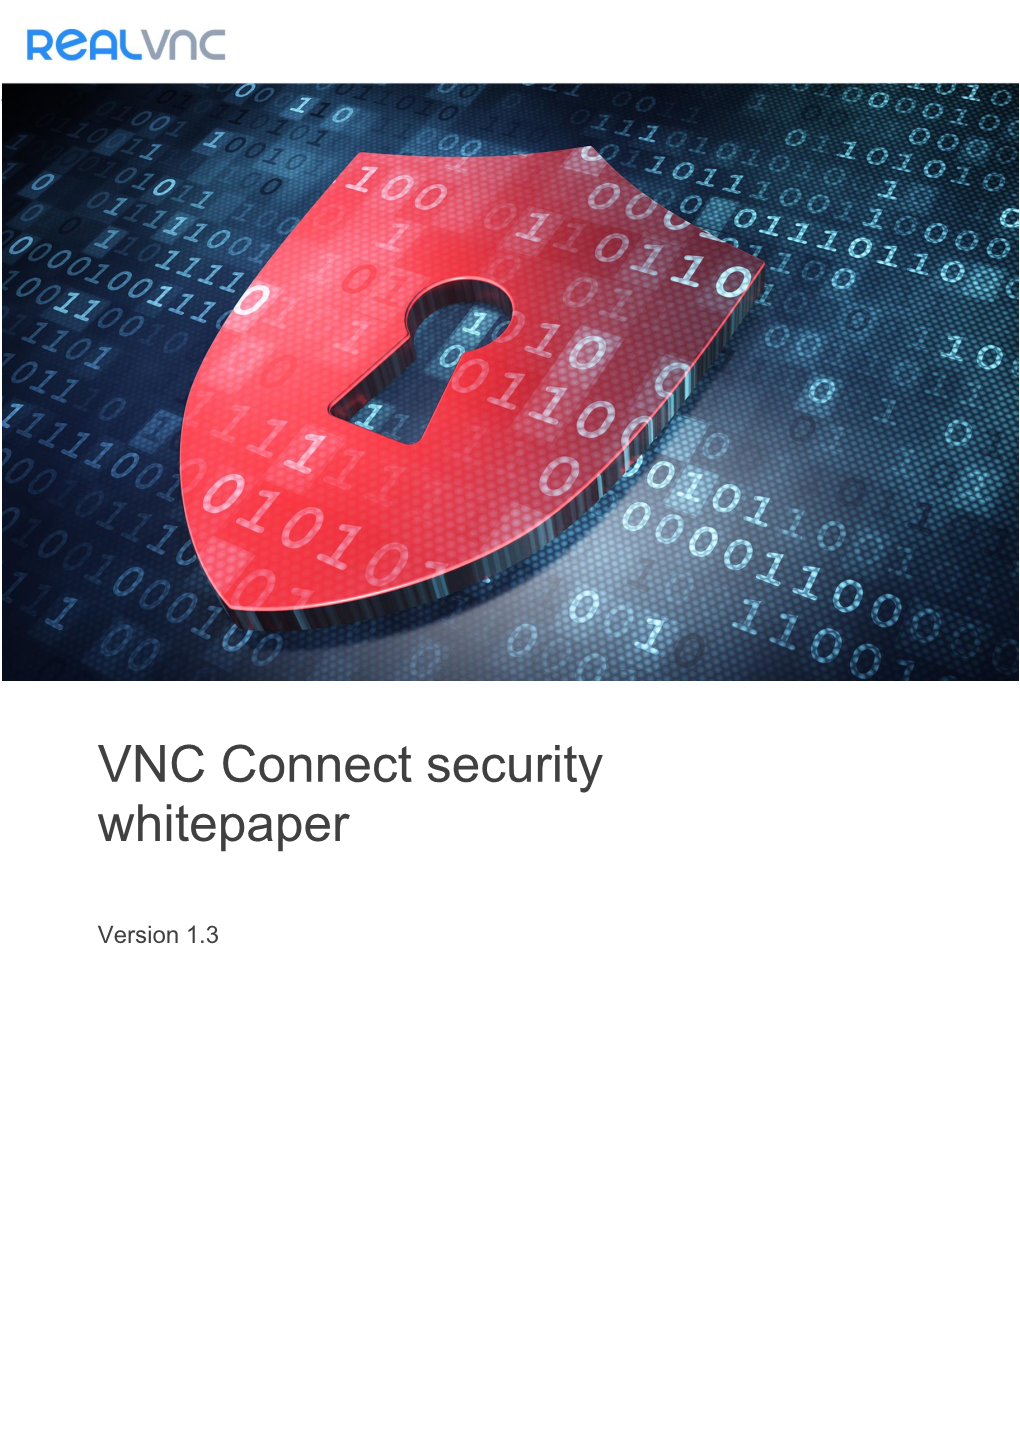 VNC Connect Security Whitepaper